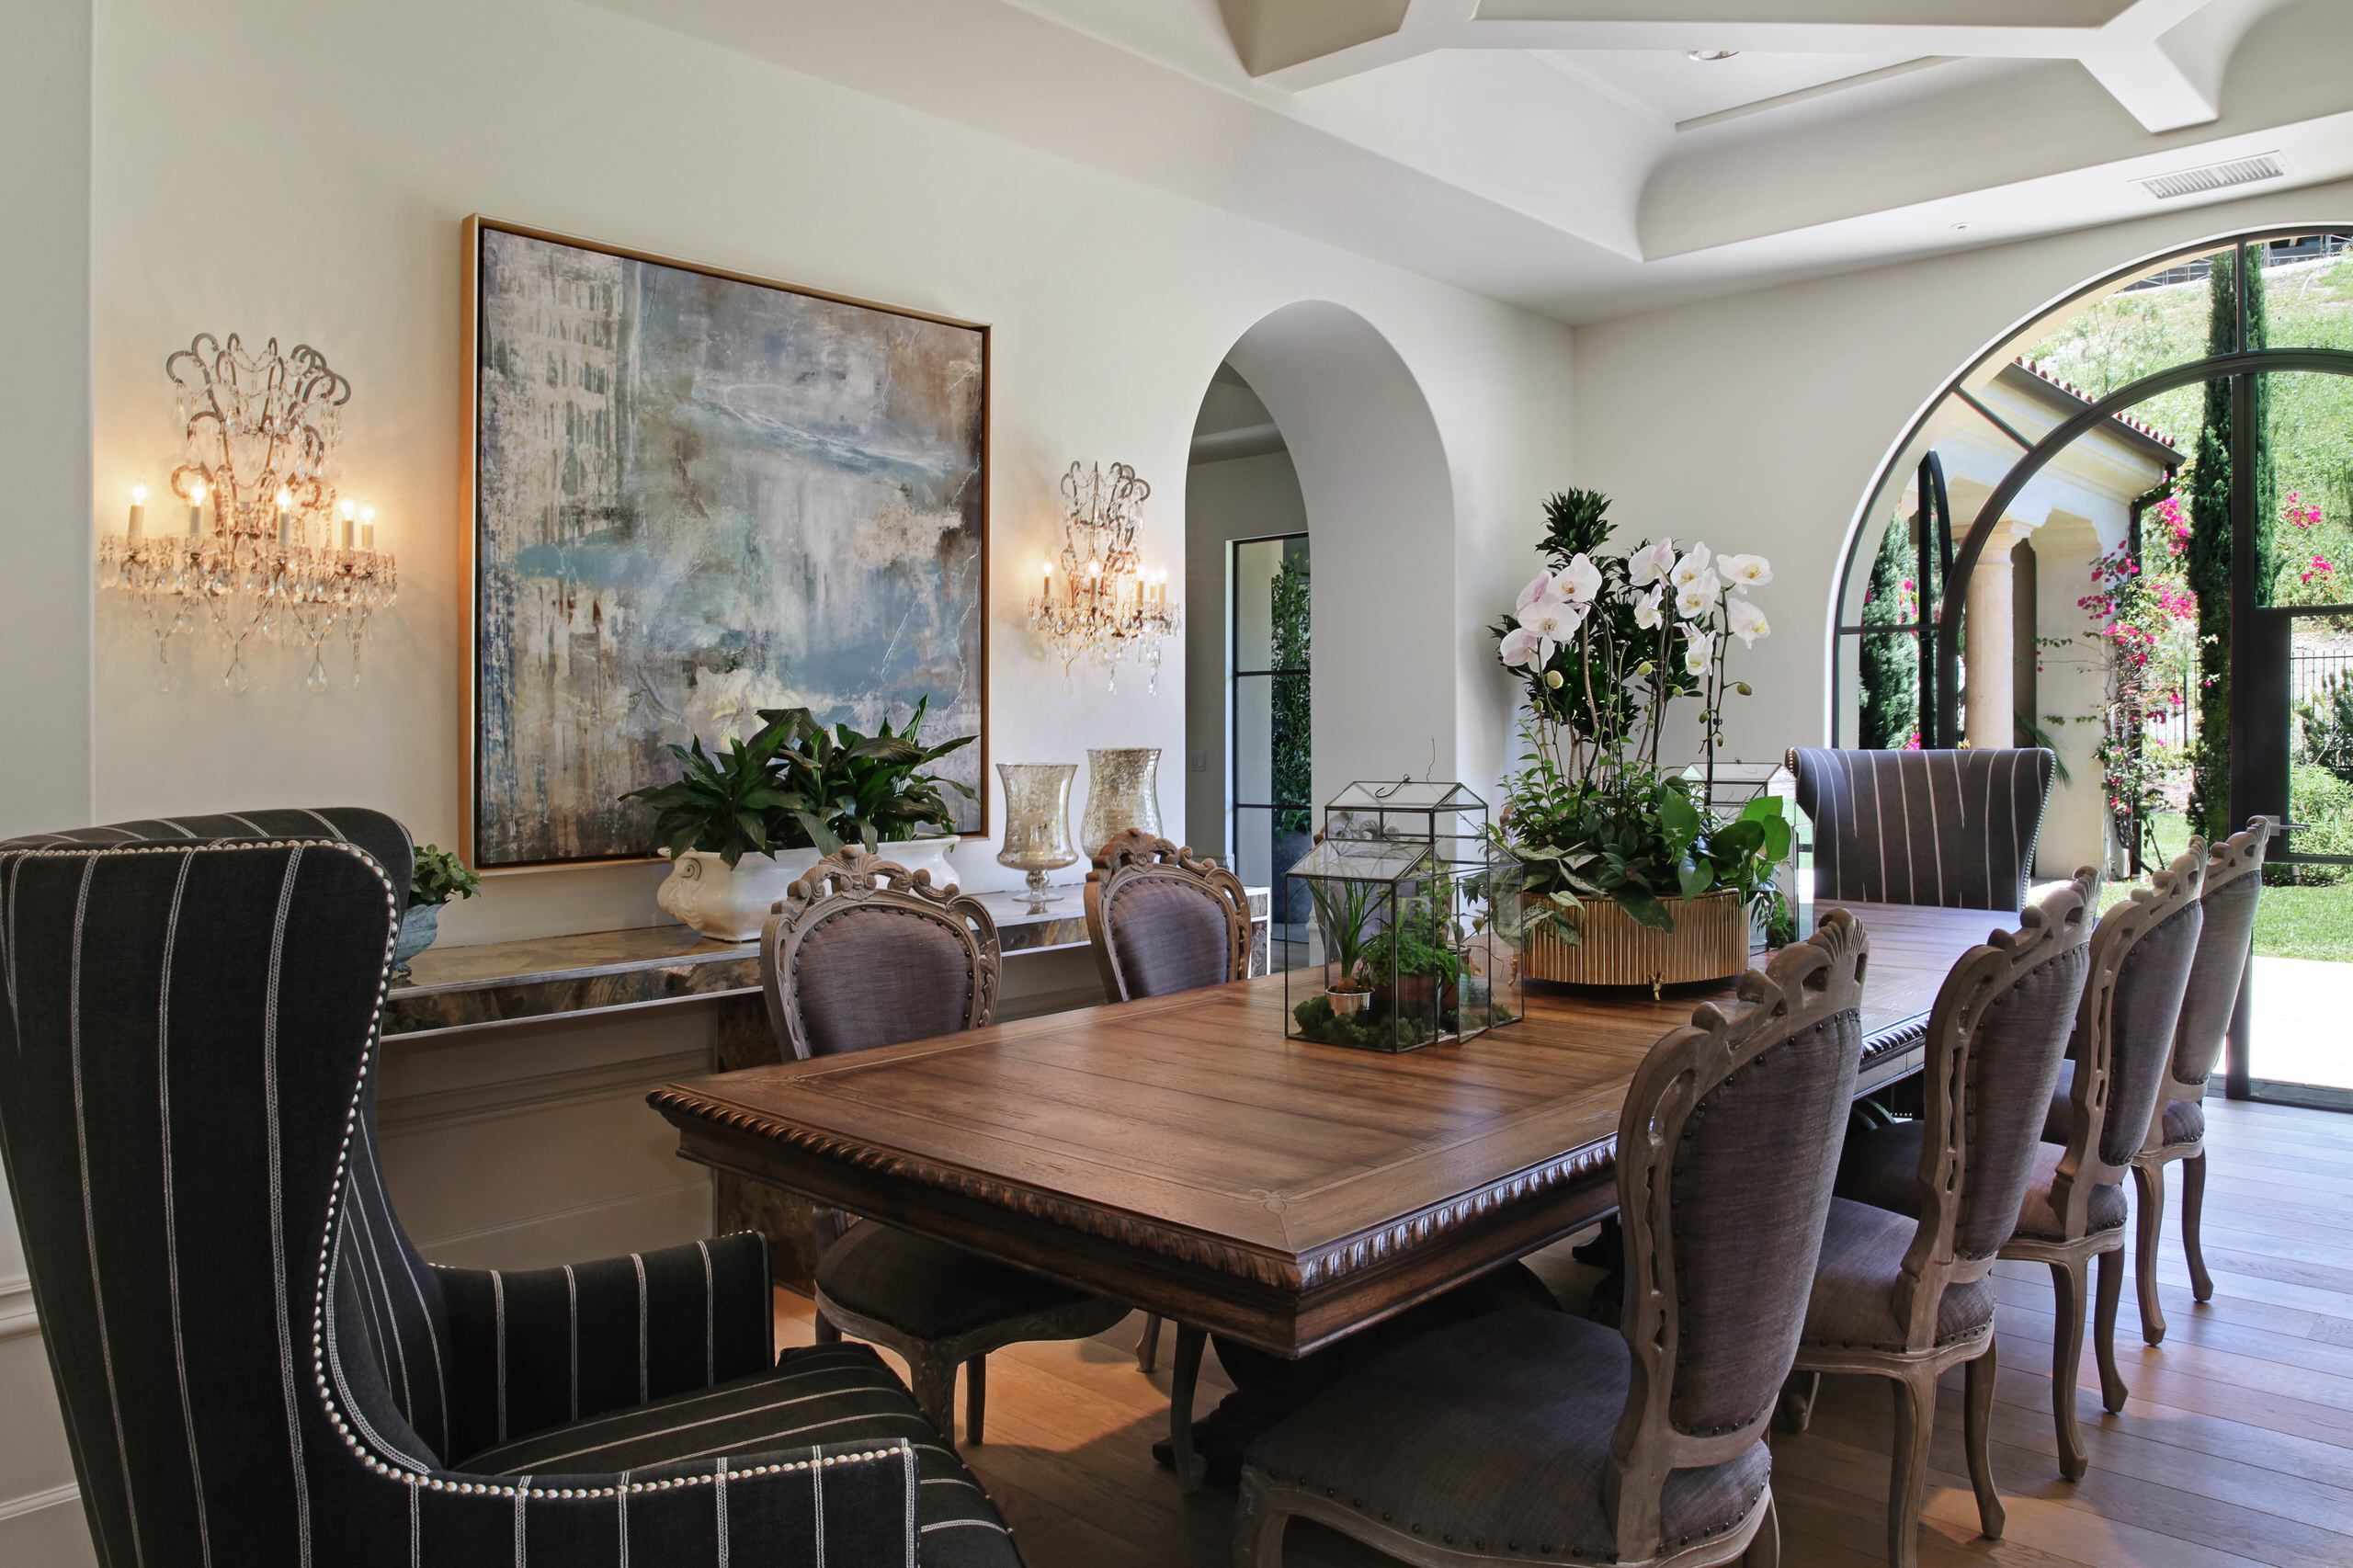 16 Absolutely Gorgeous Mediterranean Dining Room Designs
